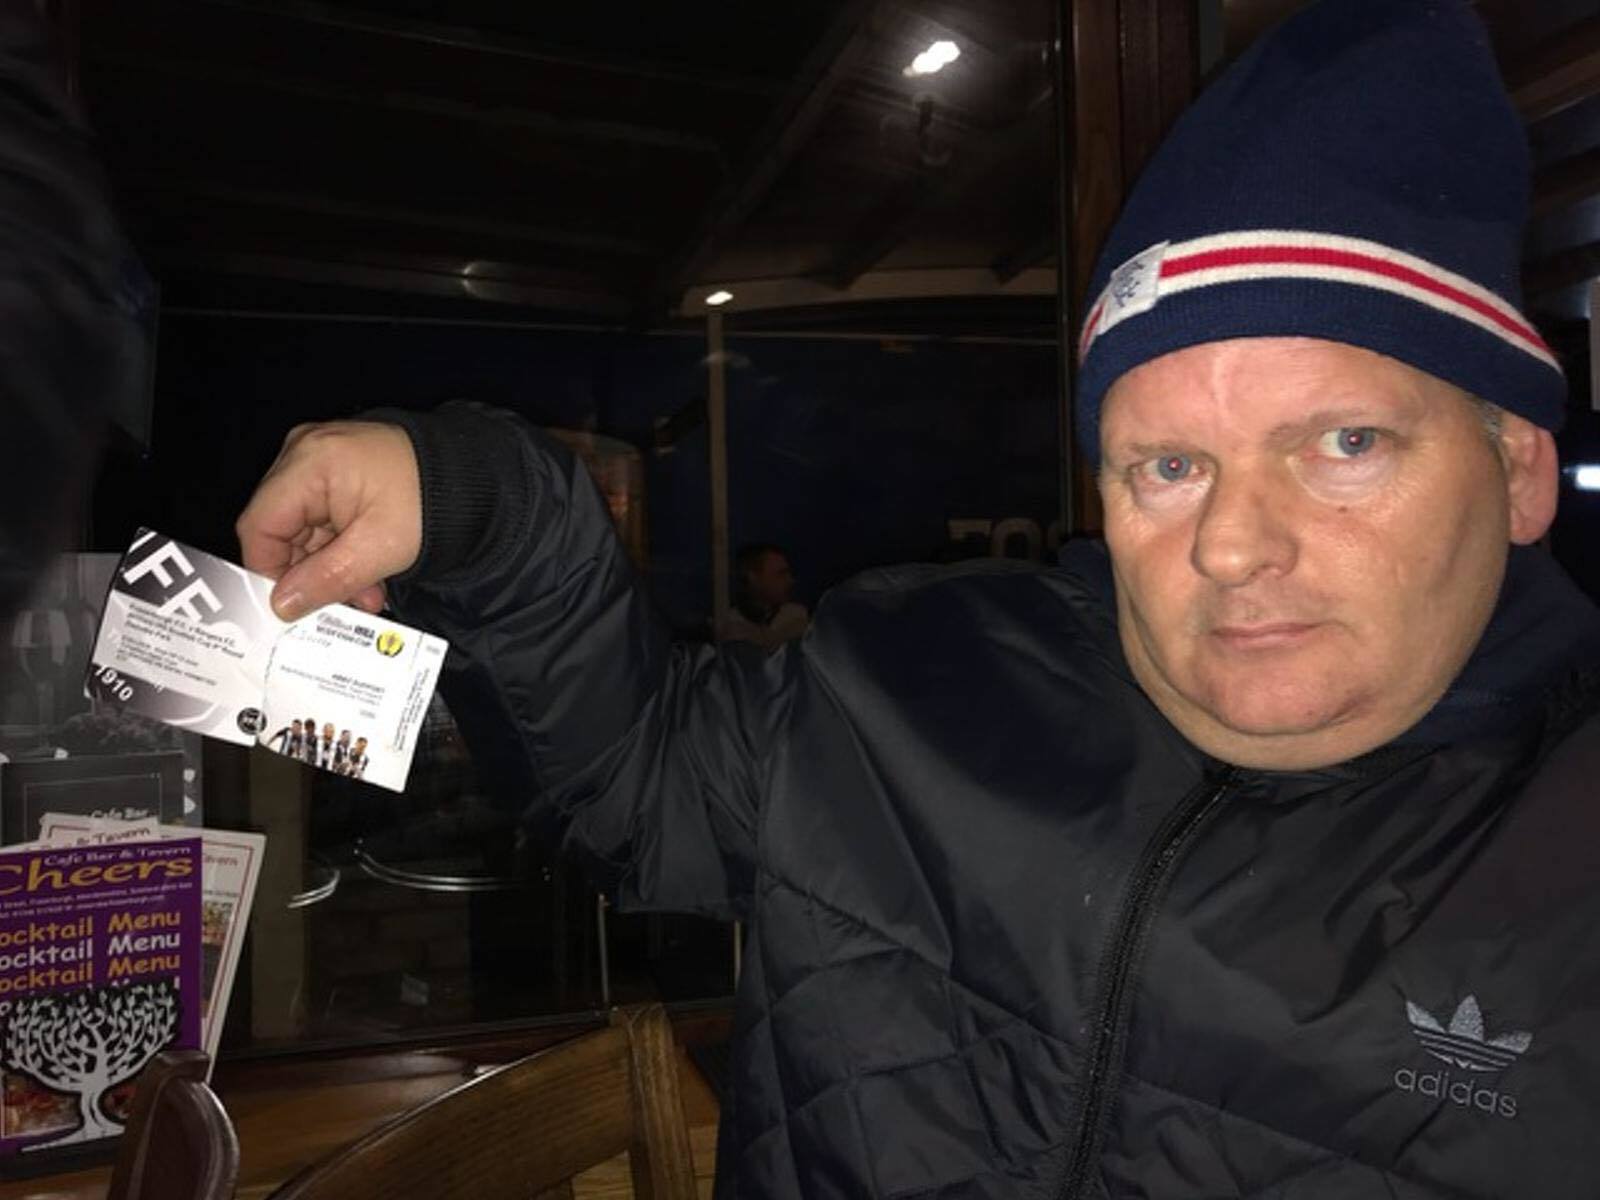 Gers fans Brian Robertson showing an allegedly fake ticket.